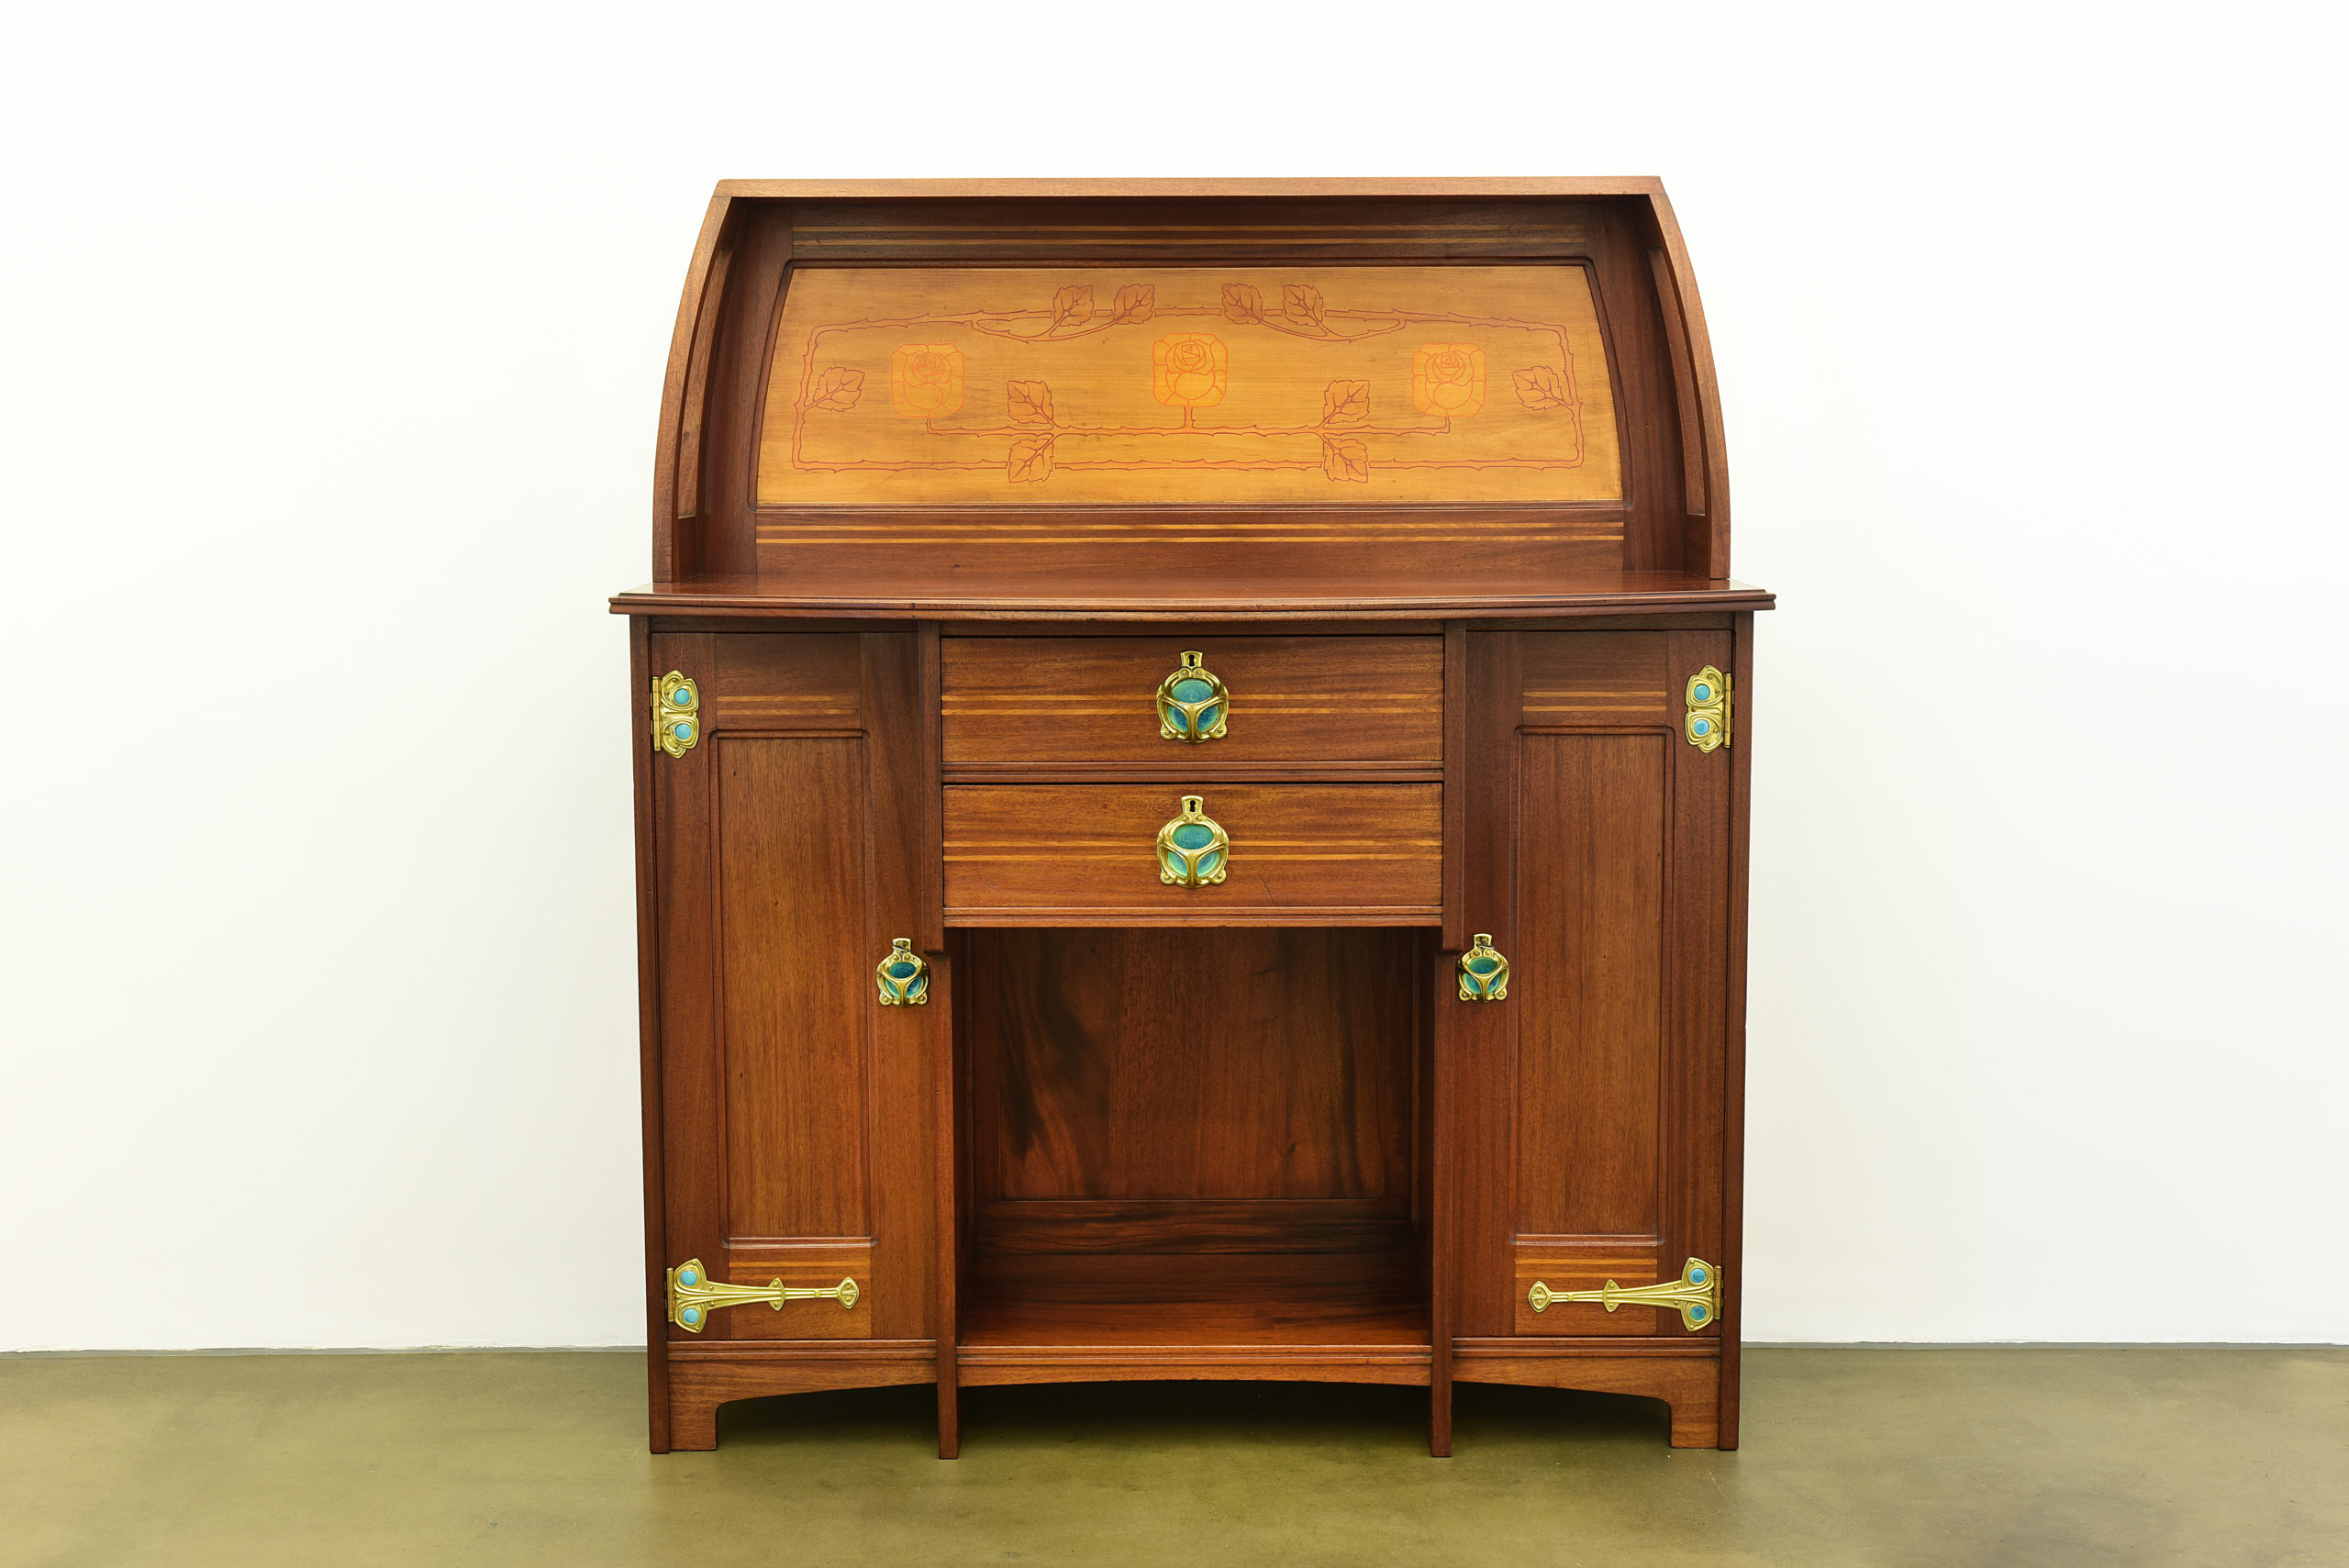 Gustave Serrurier-Bovy: Buffet, 1903, Mahogany, handles in brass and cabochon, ornamental painting